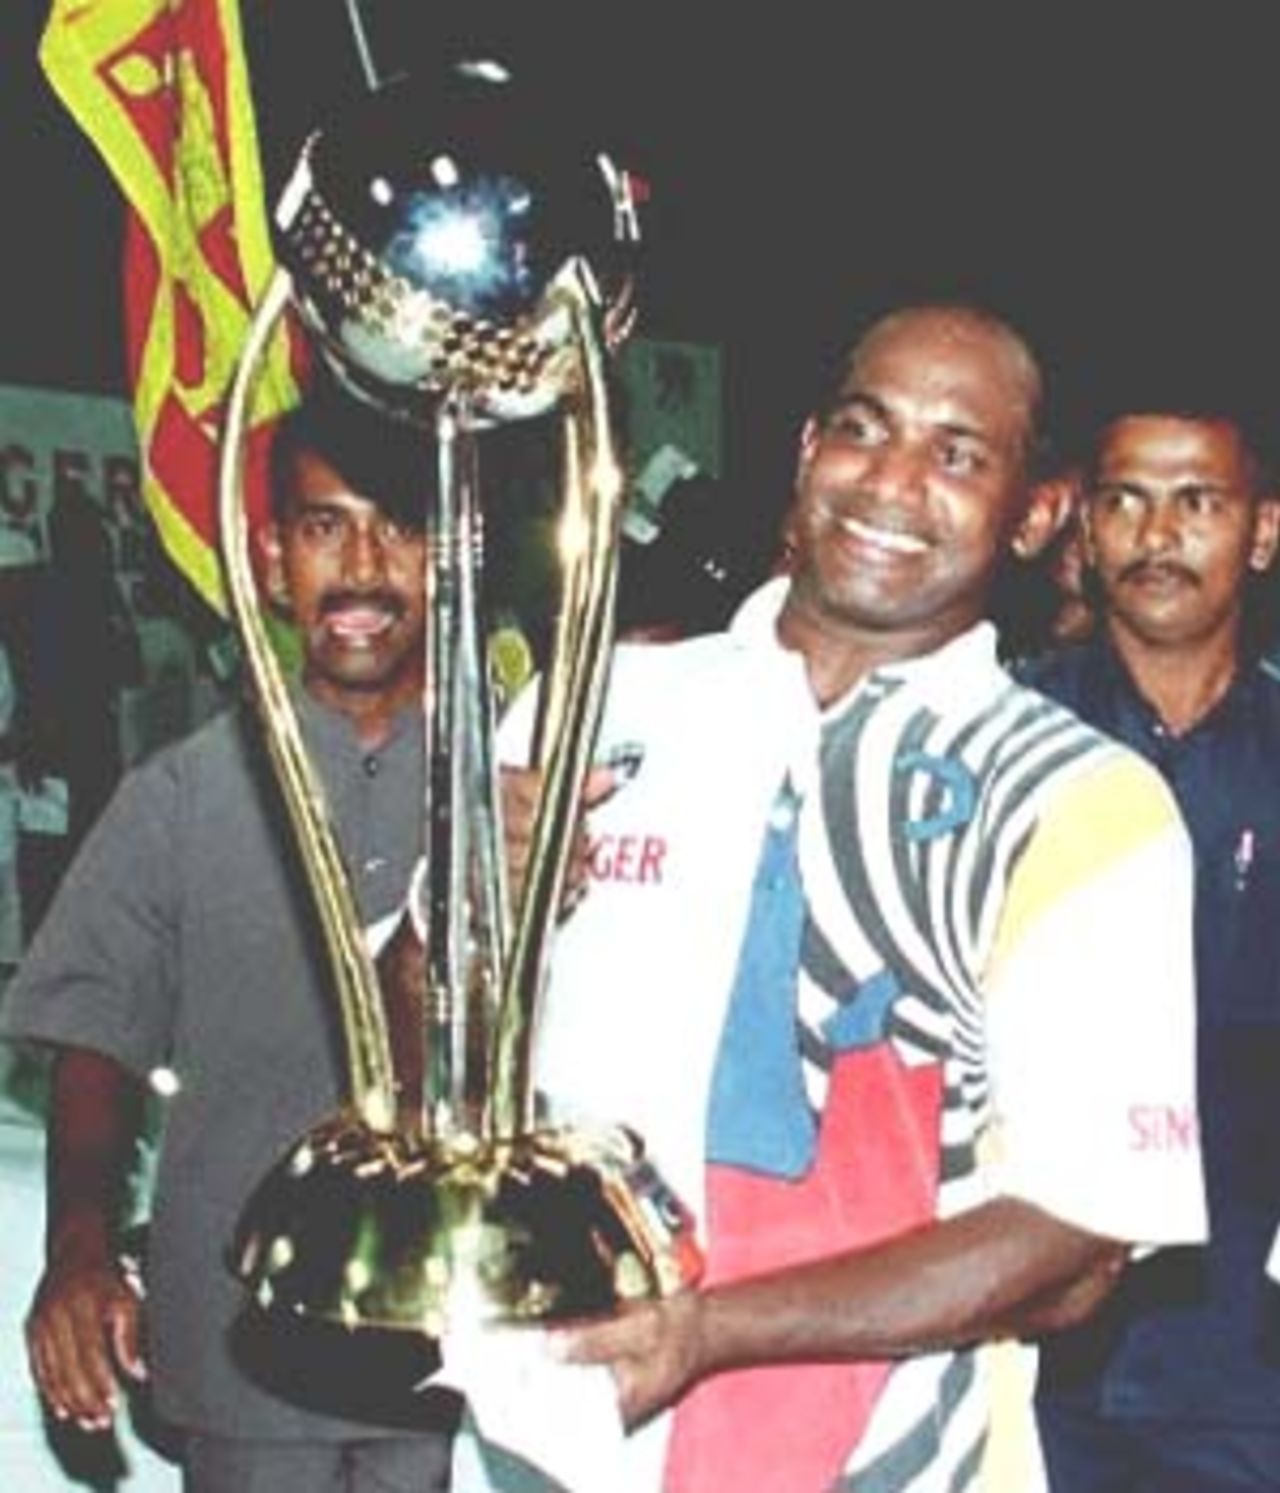 Sri Lankan skipper Sanath Jayasuriya carries the Singer Cup in Colombo. Hosts Sri Lanka unleashed their batting might to overwhelm South Africa by 30 runs in the Singer Cup one-day final. Singer Triangular Series, 2000/01, Final, Sri Lanka v South Africa, R.Premadasa Stadium, Khettarama, Colombo, 14 July 2000.